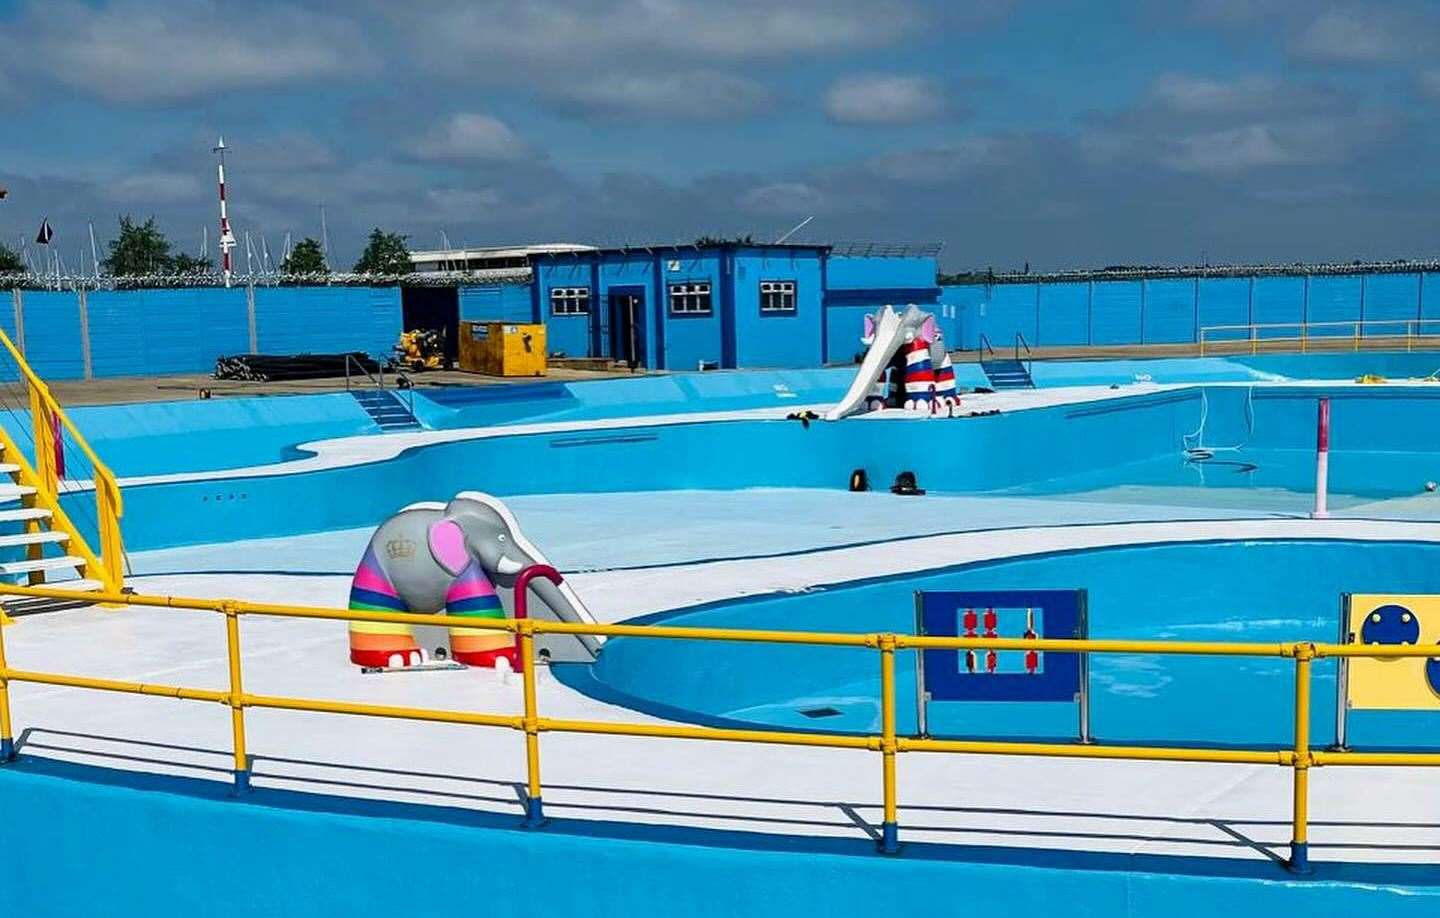 The Strand Lido in Gillingham closed unexpectedly last month. Picture: Medway Sport Facebook